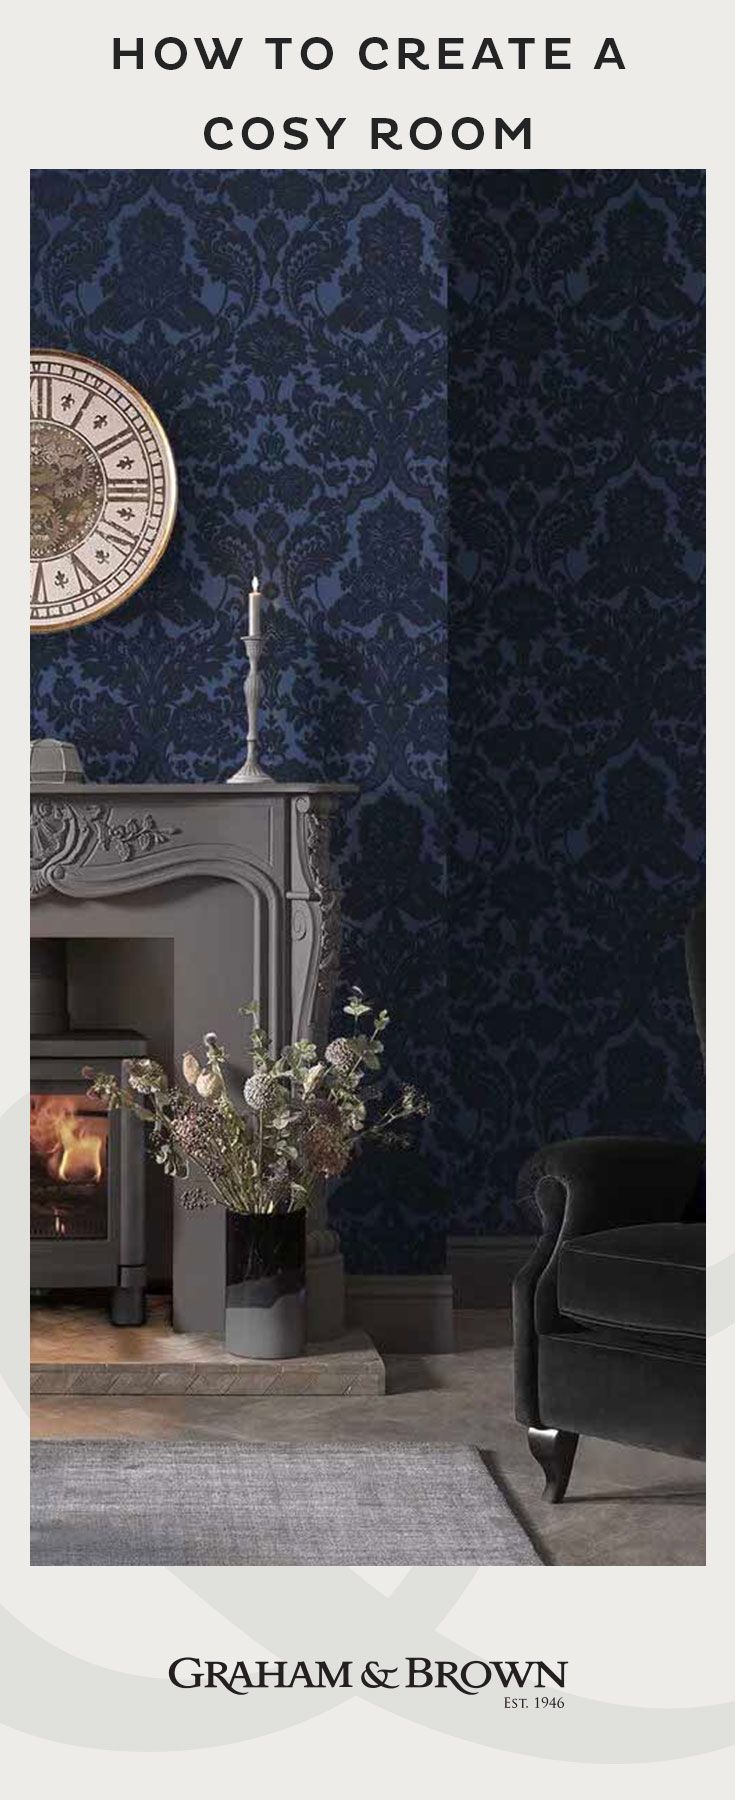 Embellished Wallpaper Is Another Way To Add Cosy Texture Your